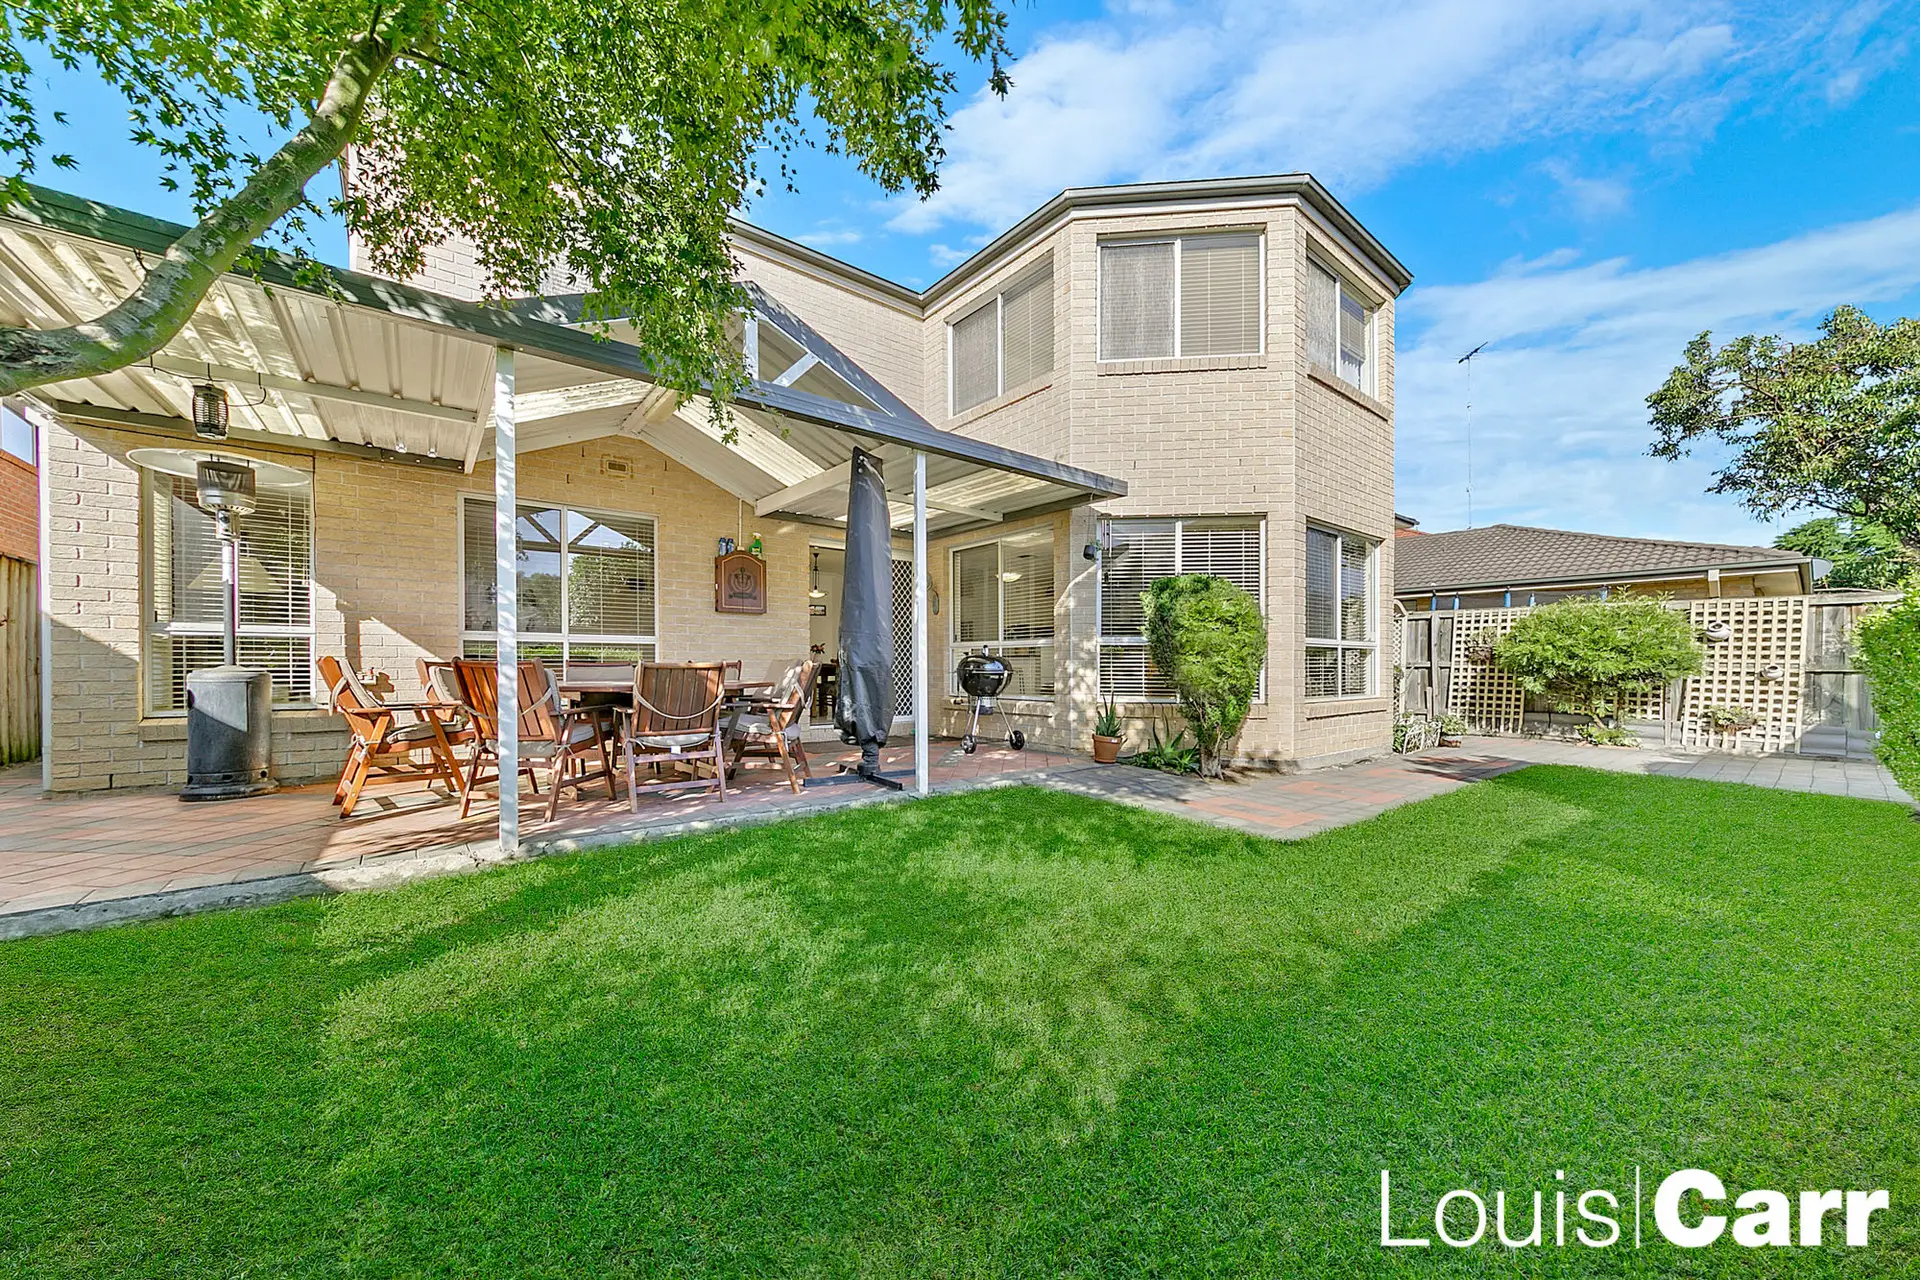 Photo #10: 41 Drummond Road, Beaumont Hills - Sold by Louis Carr Real Estate